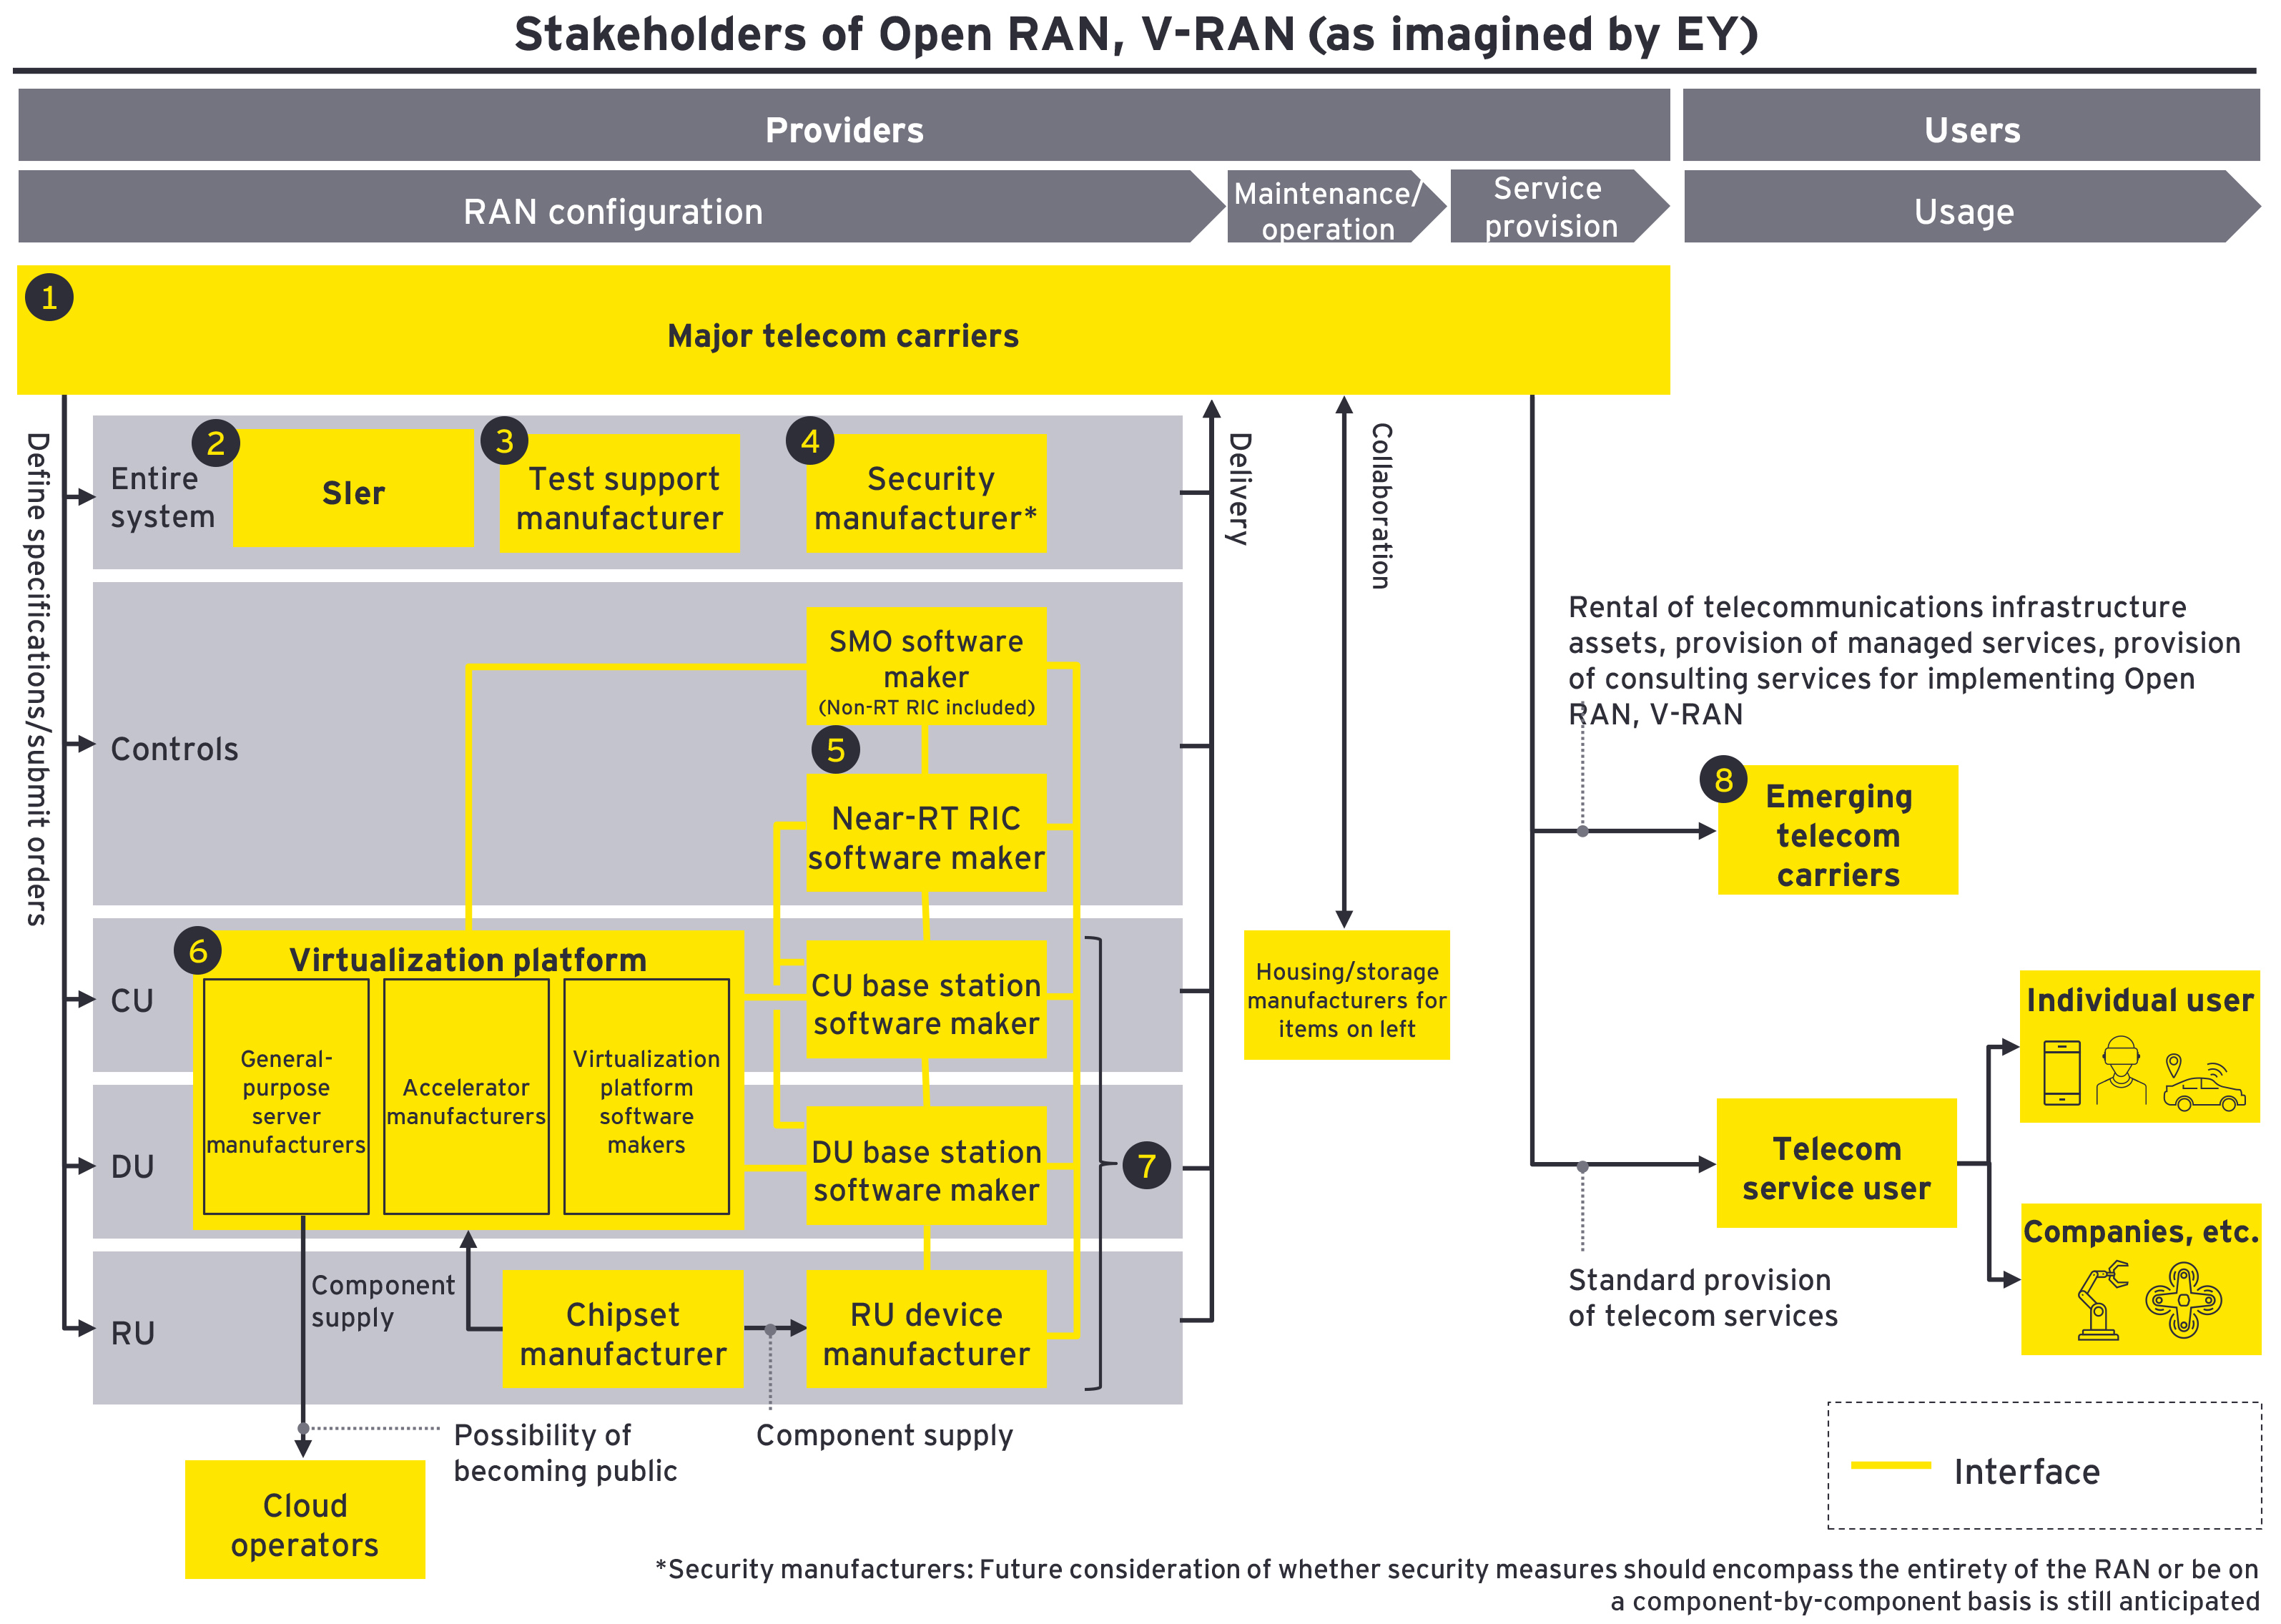 Figure5: Stakeholders of Open RAN, V-RAN (as imagined by EY)